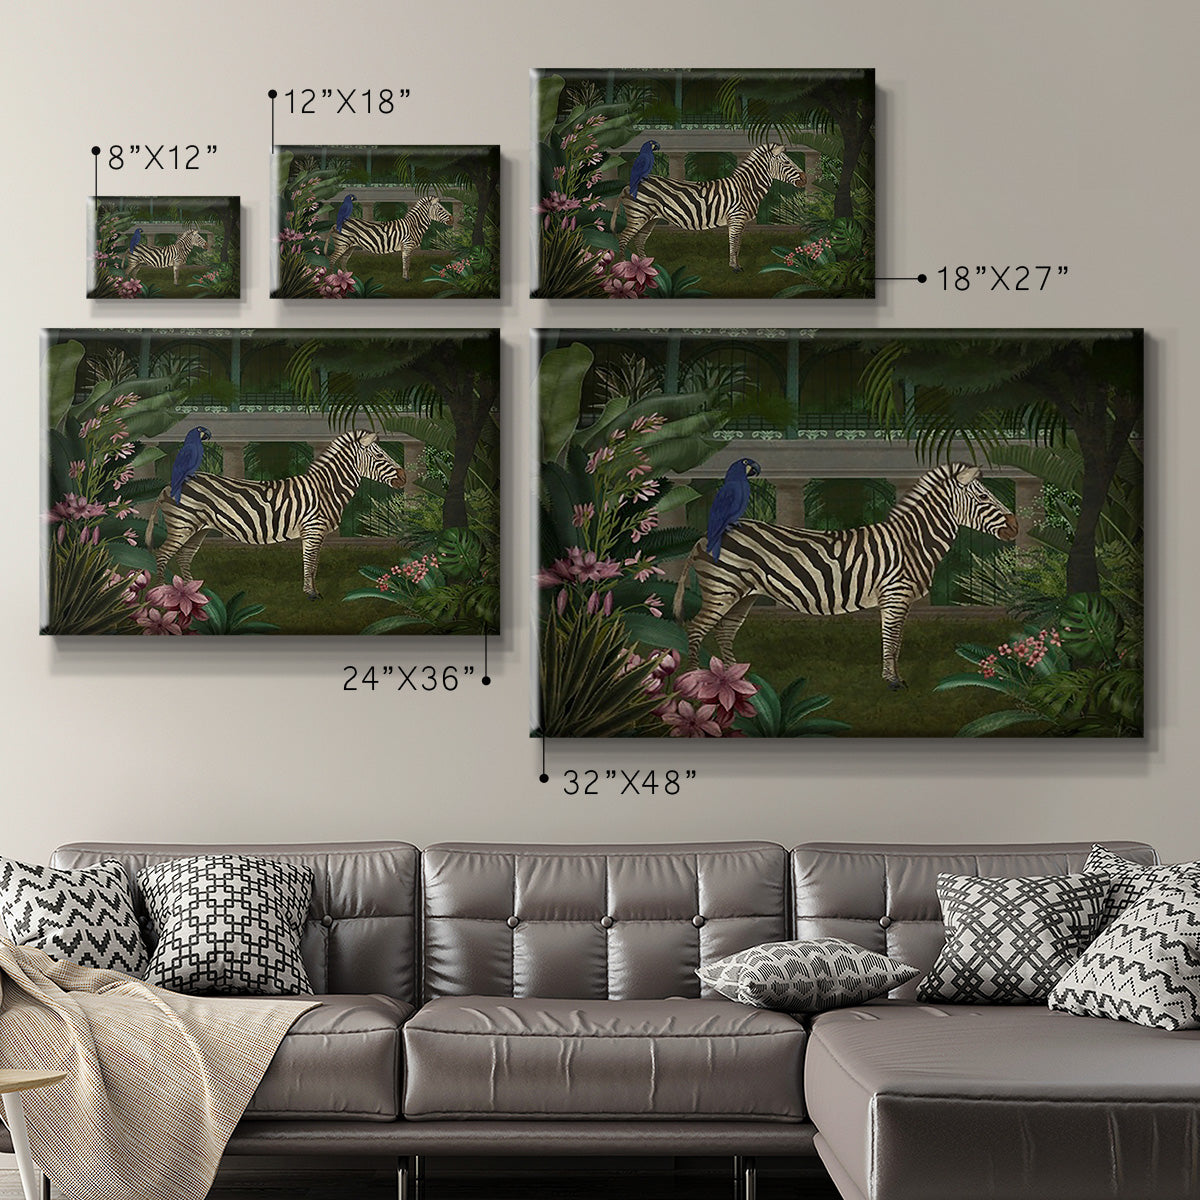 Zebra In Conservatory Premium Gallery Wrapped Canvas - Ready to Hang